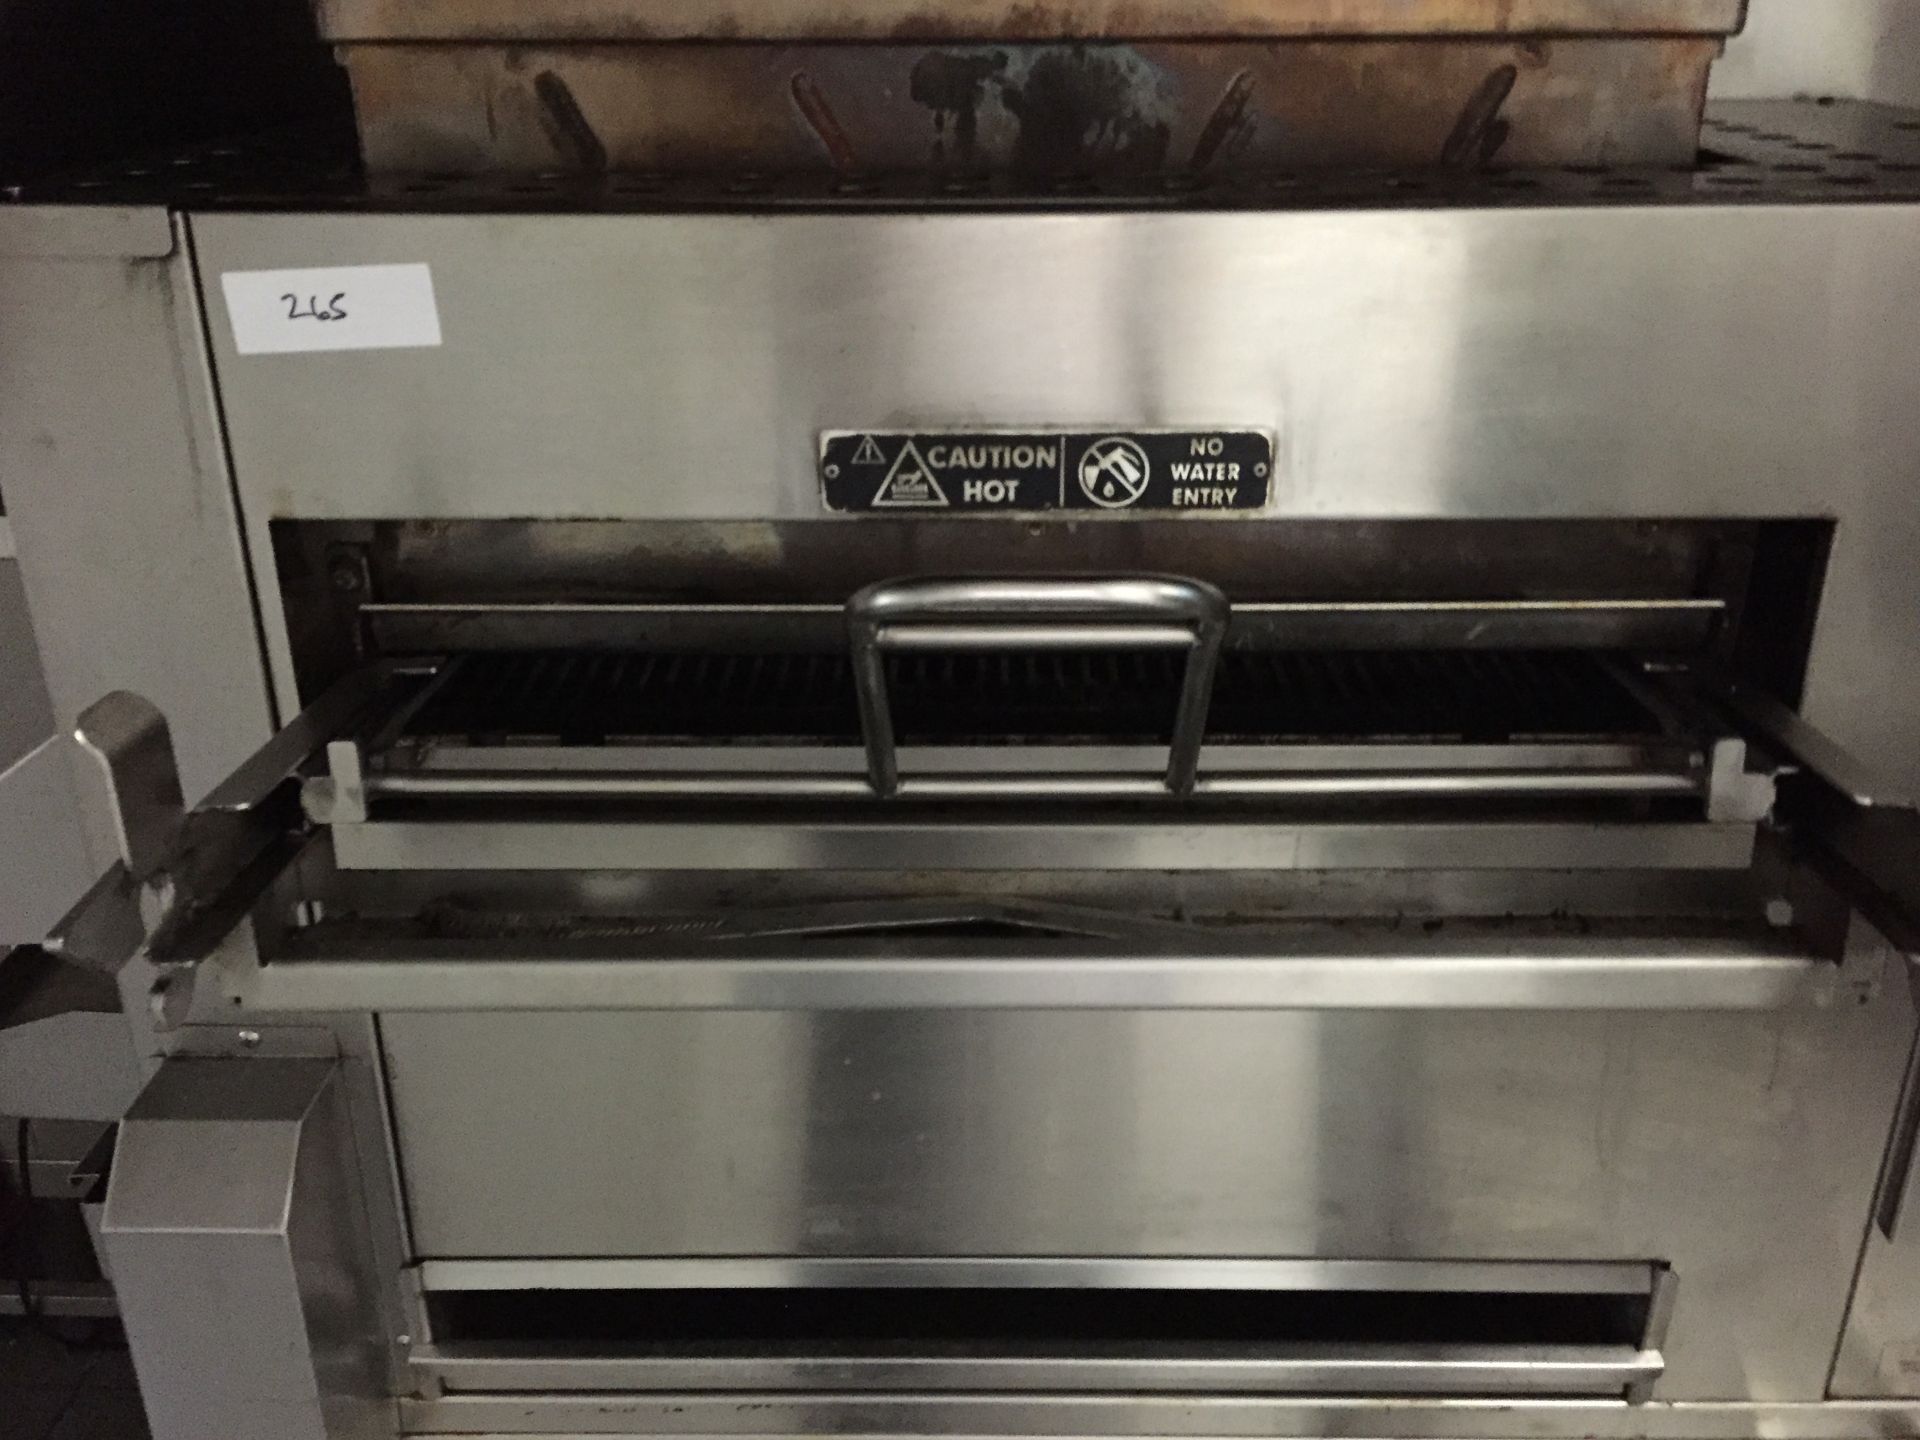 1 x Duke Flexible Batch Broiler - Used in Burger King Restaurants - Flame Broils a Batch of - Image 3 of 6